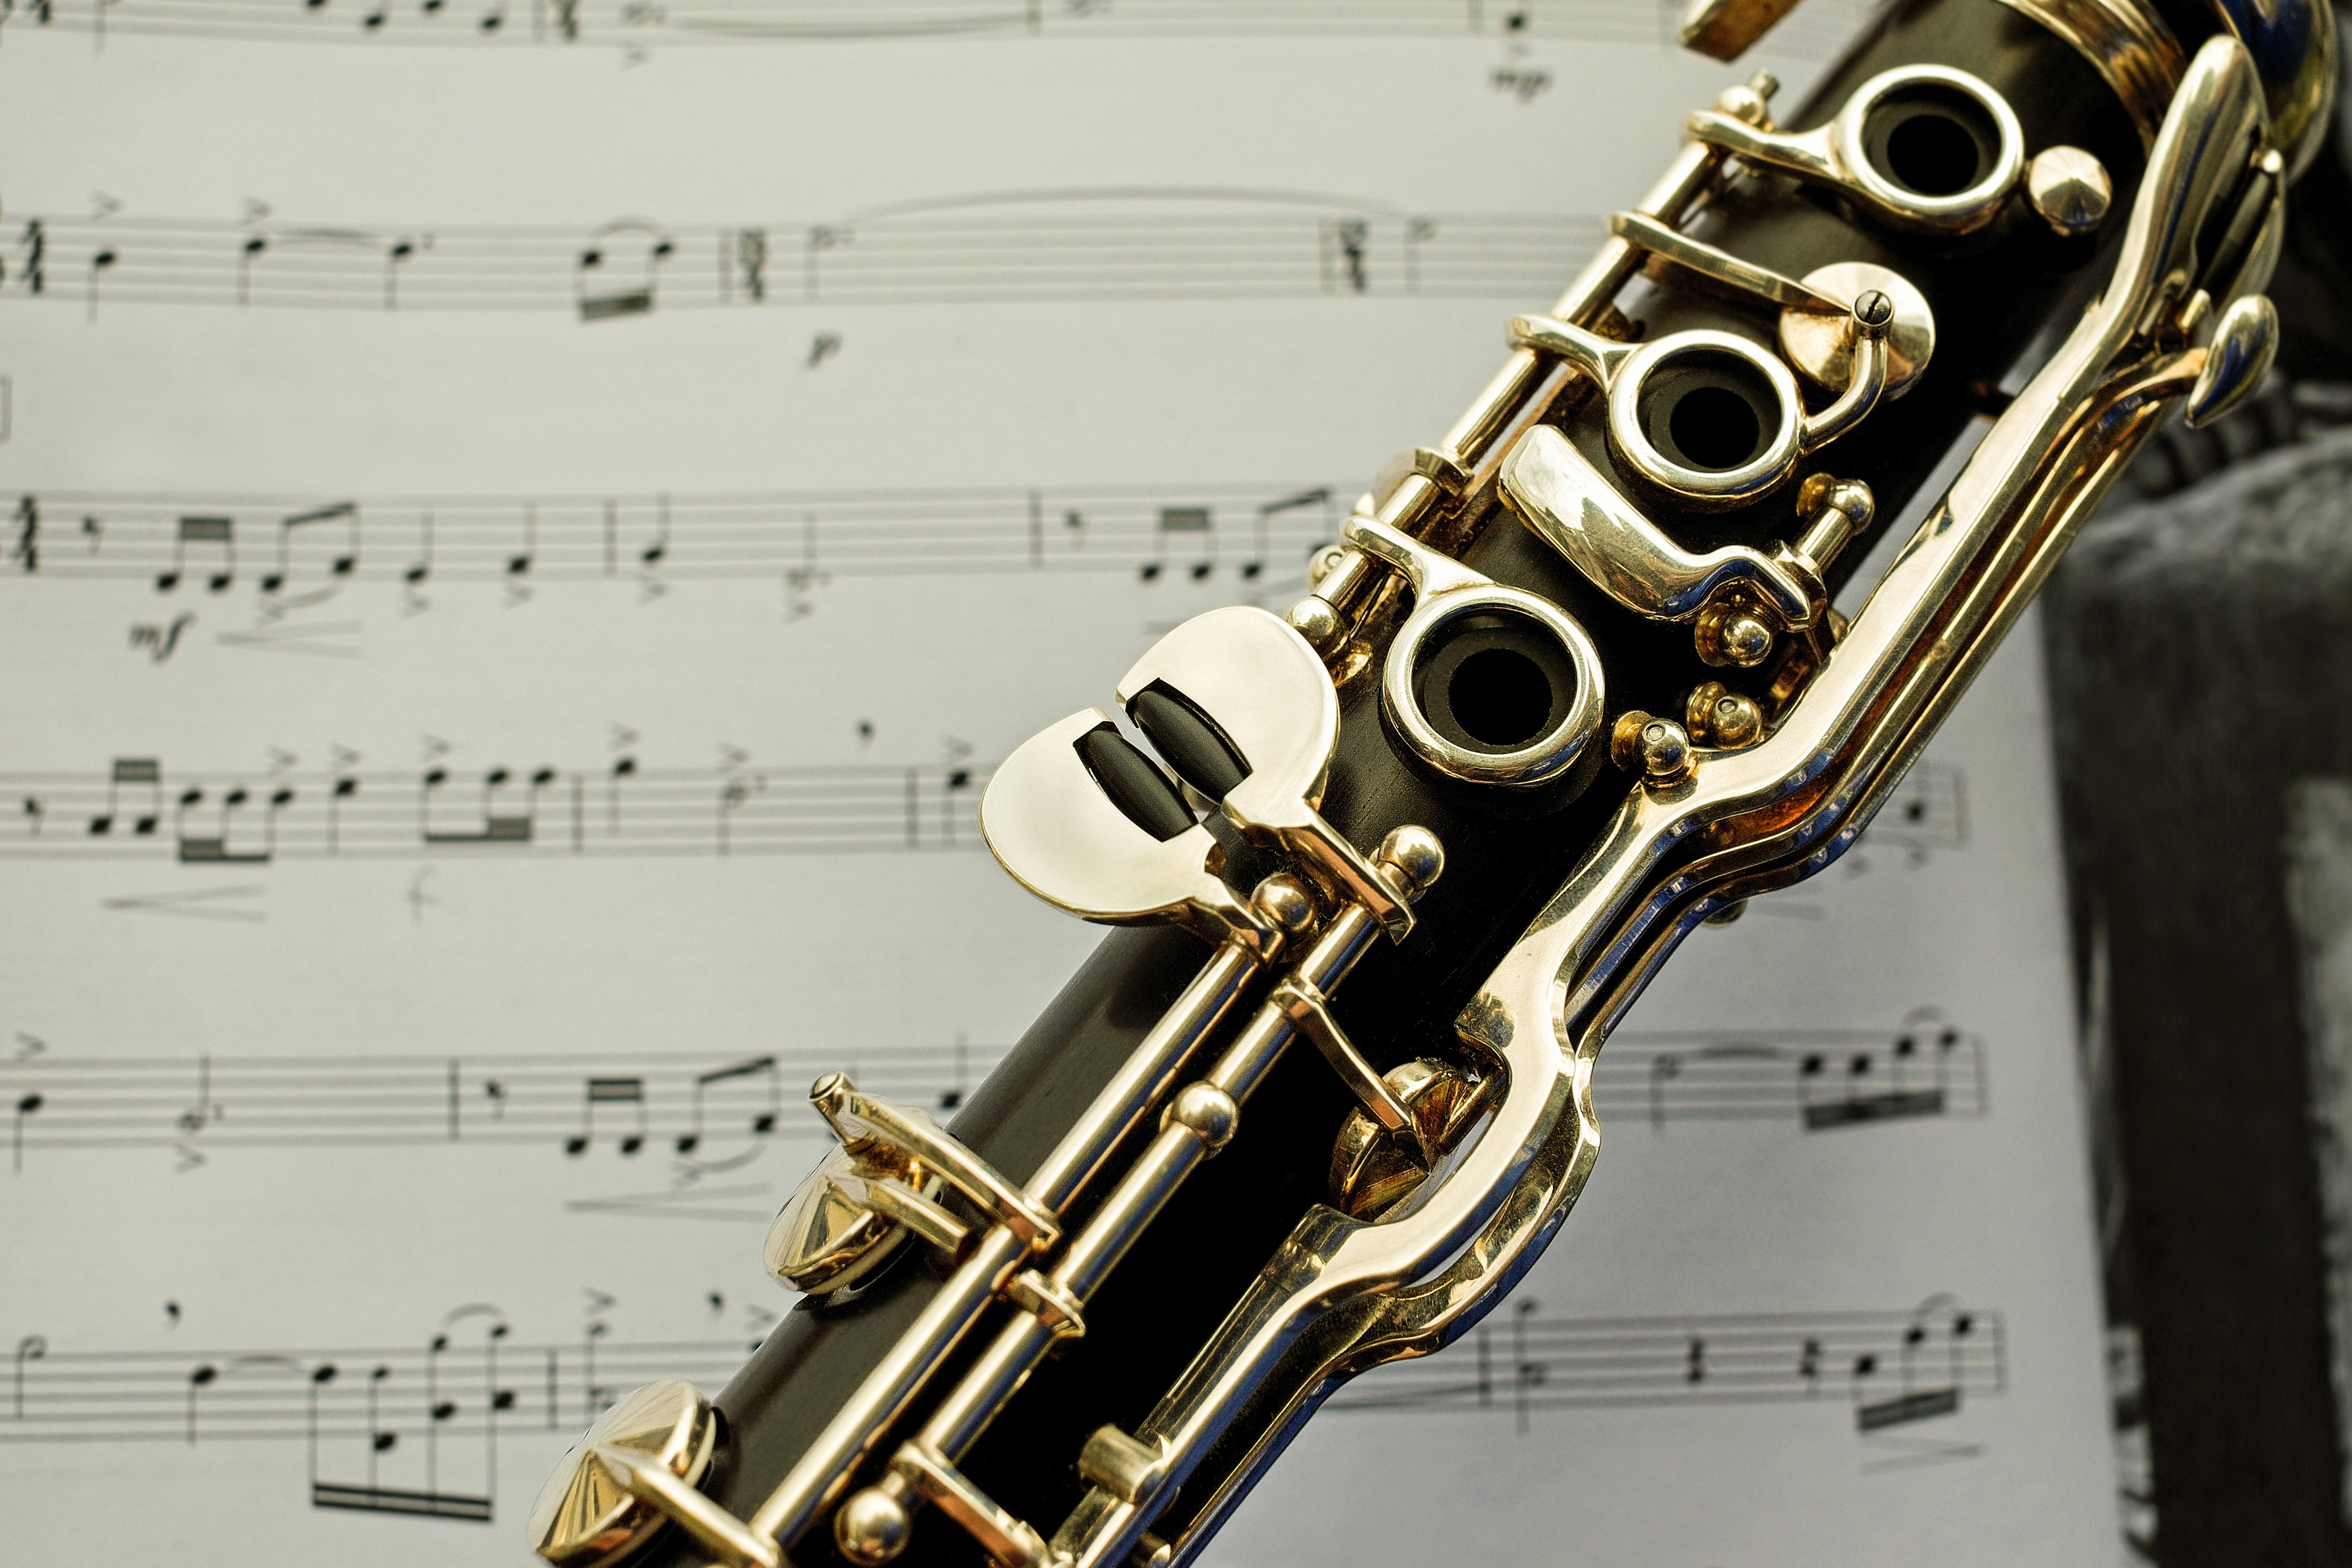 image of a flute and sheet music